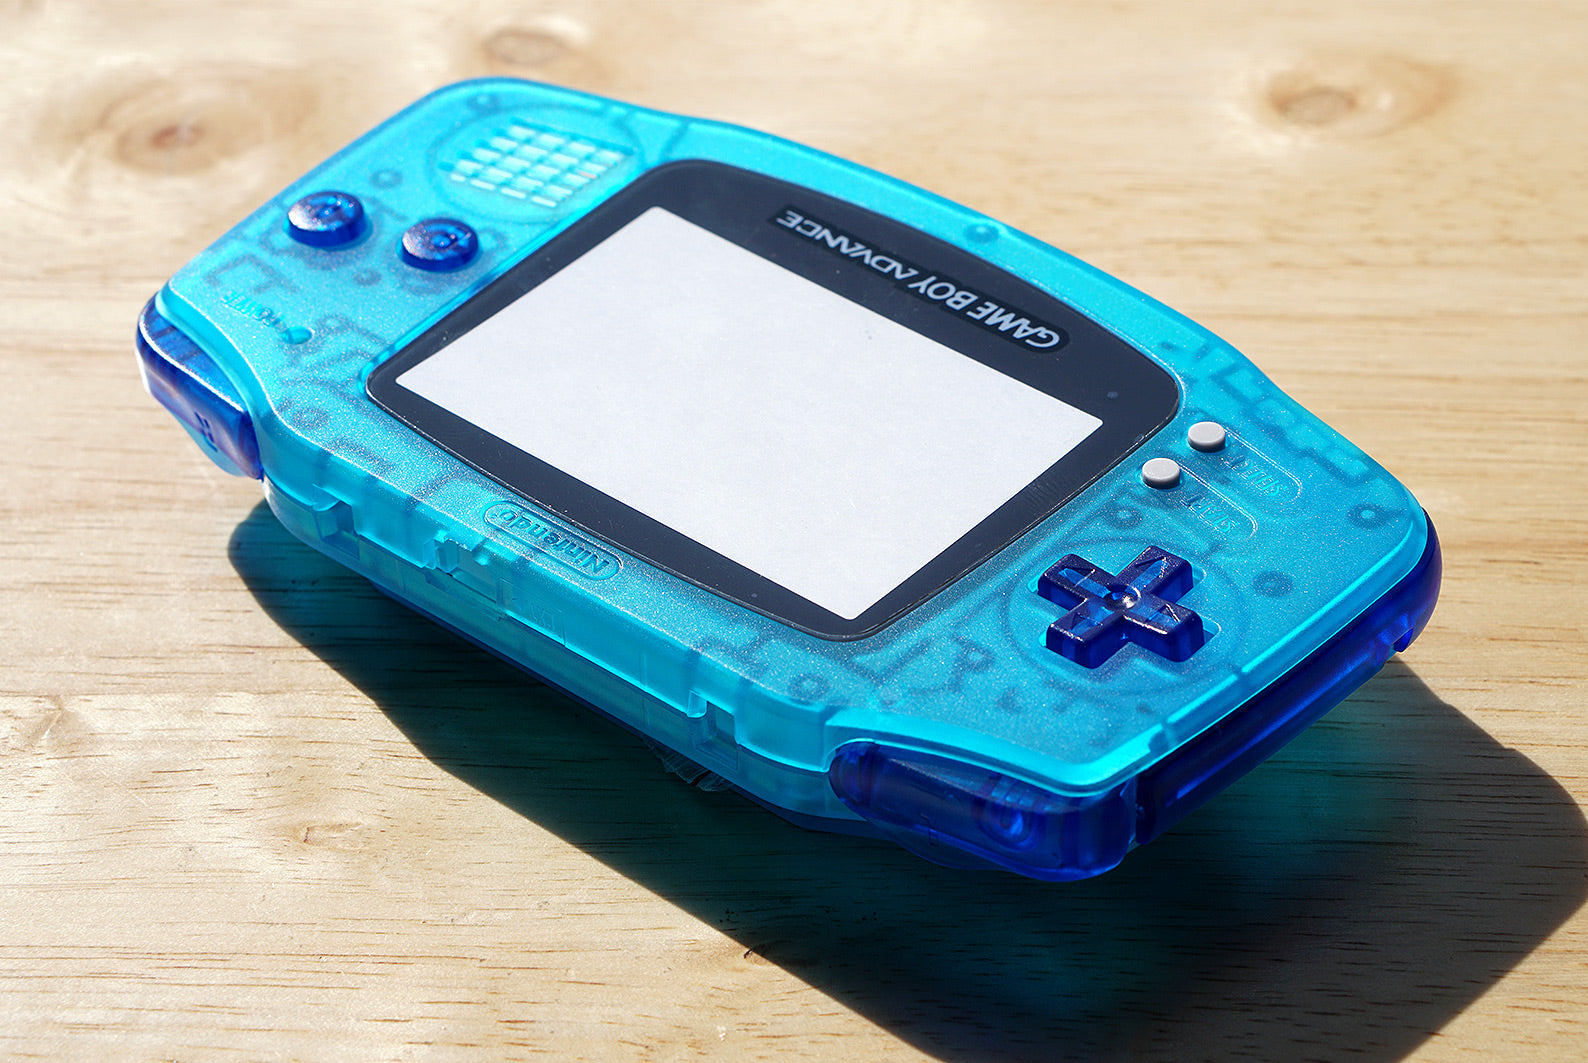 Gameboy Advance GBA IPS ready Glow in the Dark Clear Blue Shell w/ Dark Clear Blue Buttons